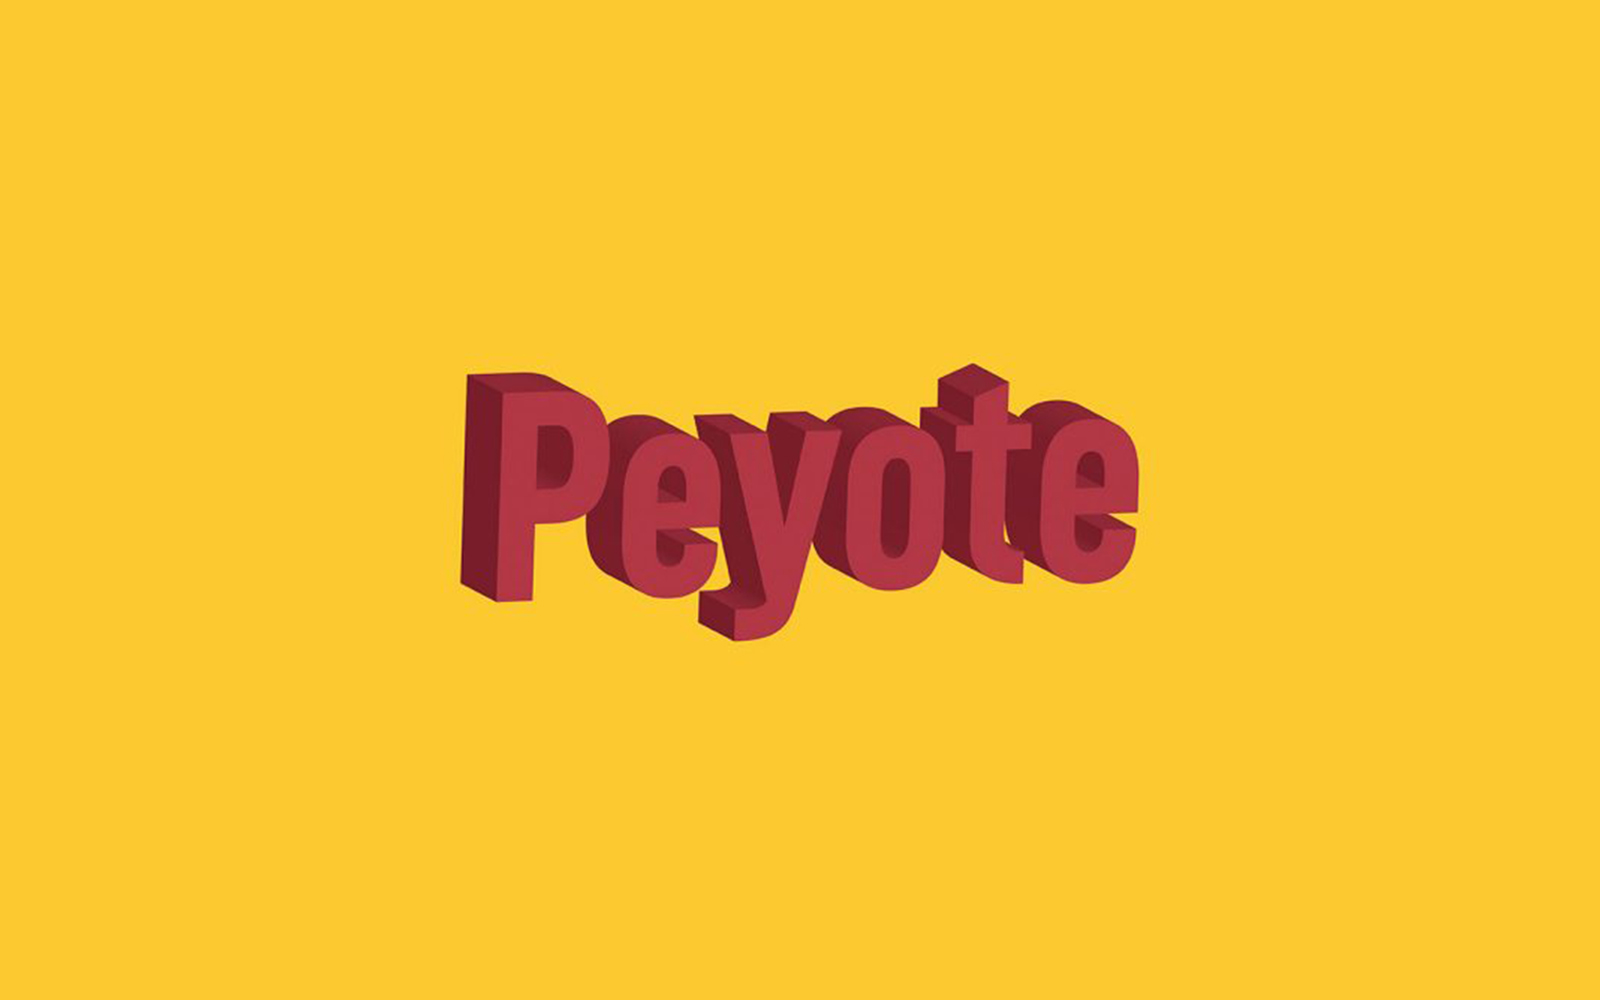 legal consequences of peyote